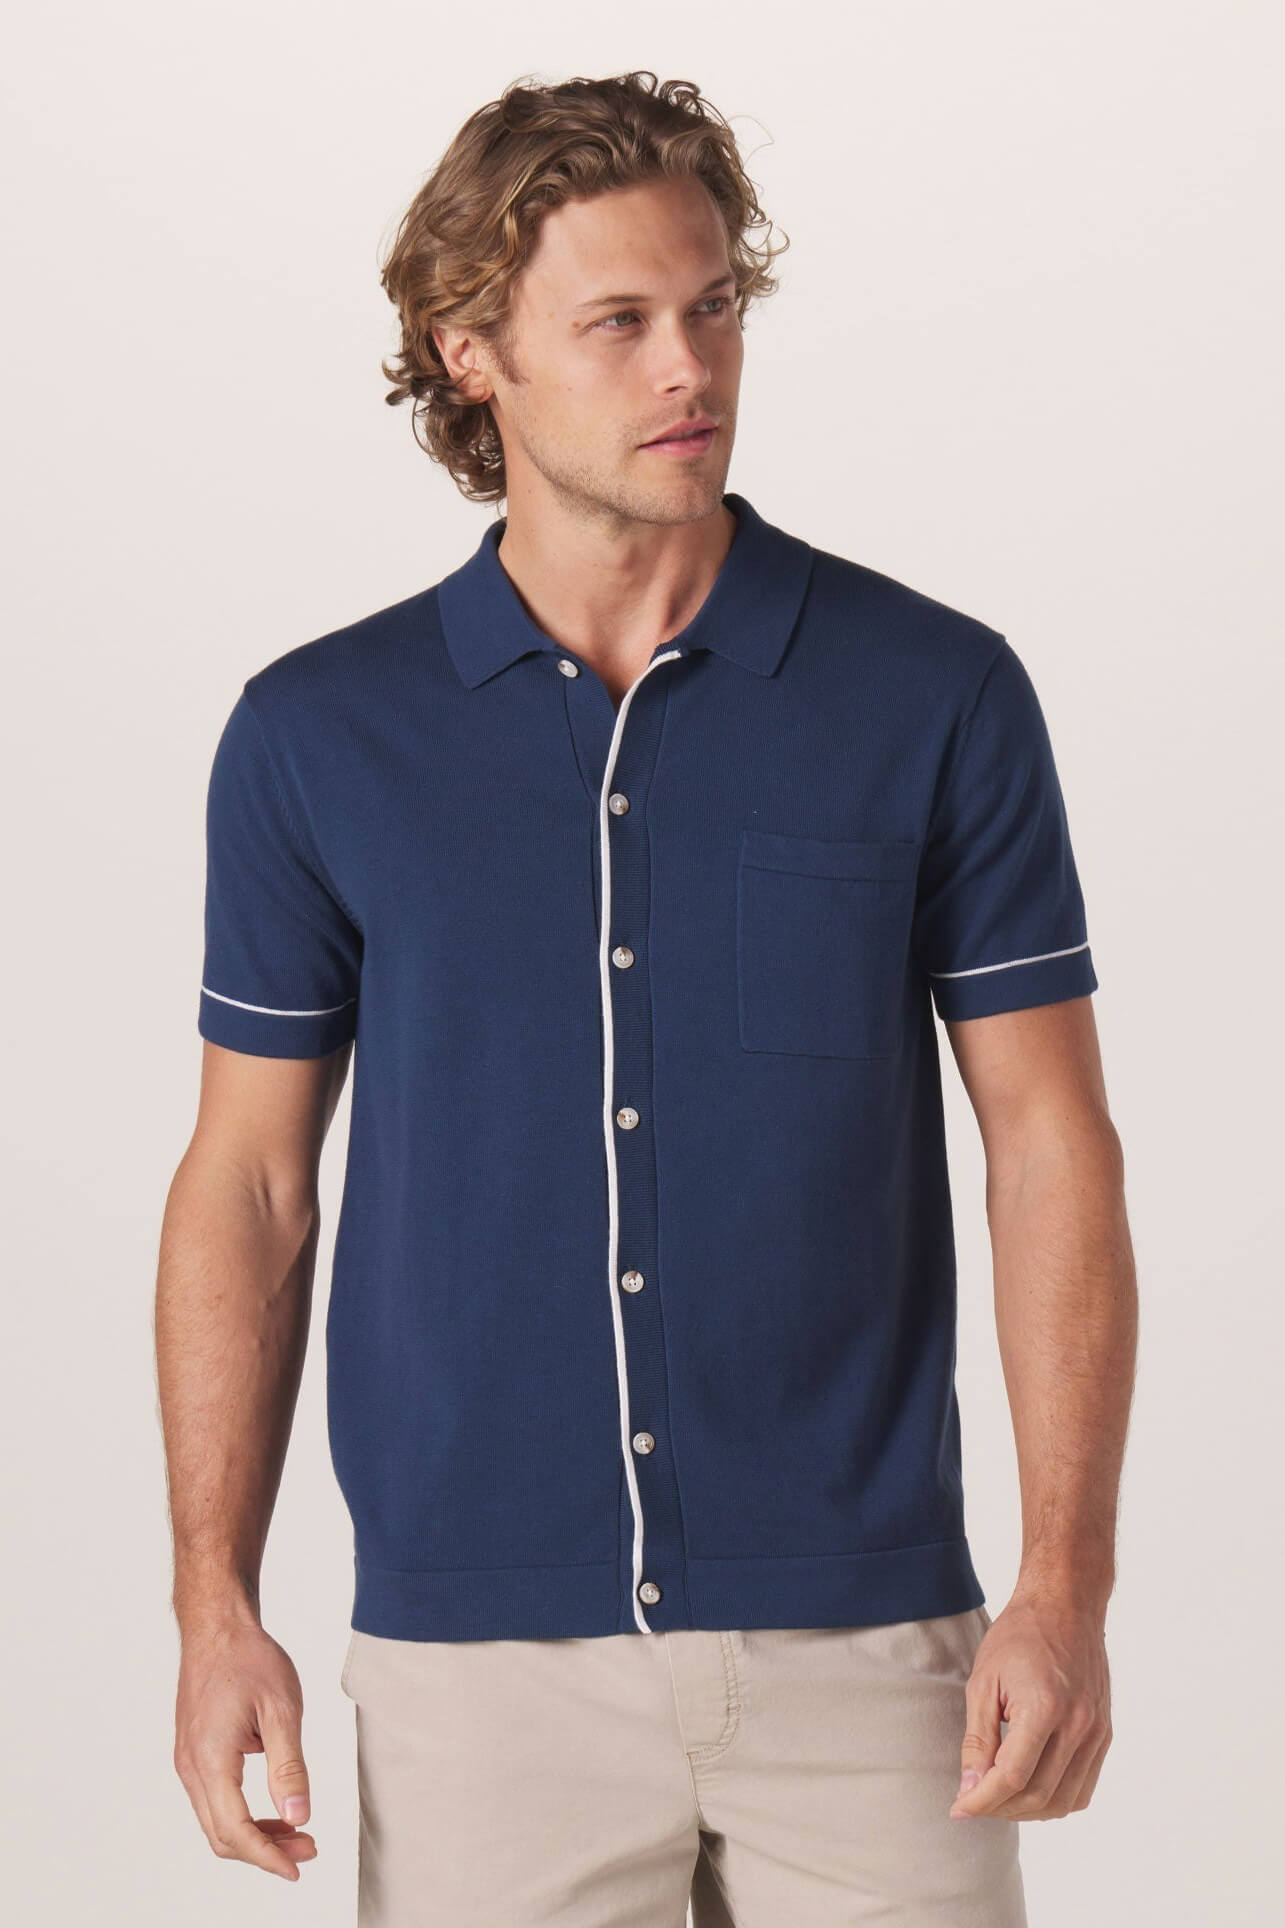 The Normal Brand Robles knit button down in navy and white